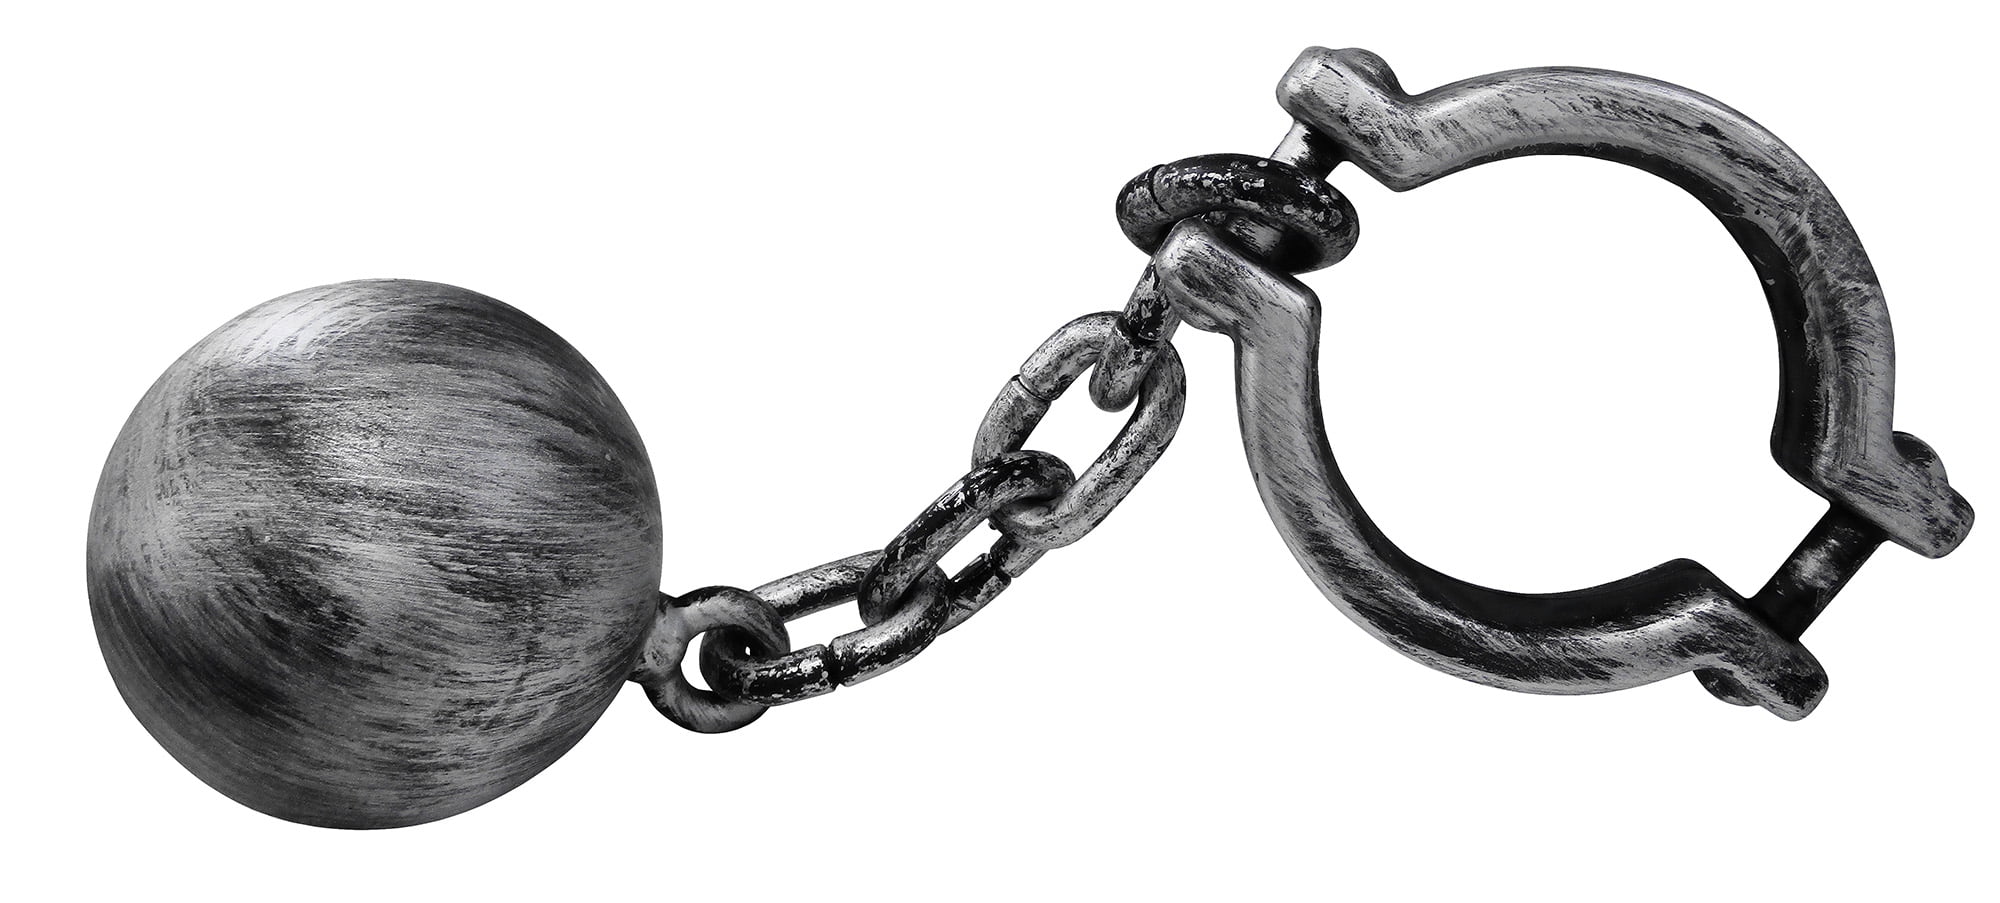 Nicky Bigs Novelties Adult Ball and Chain Leg Shackle Convict